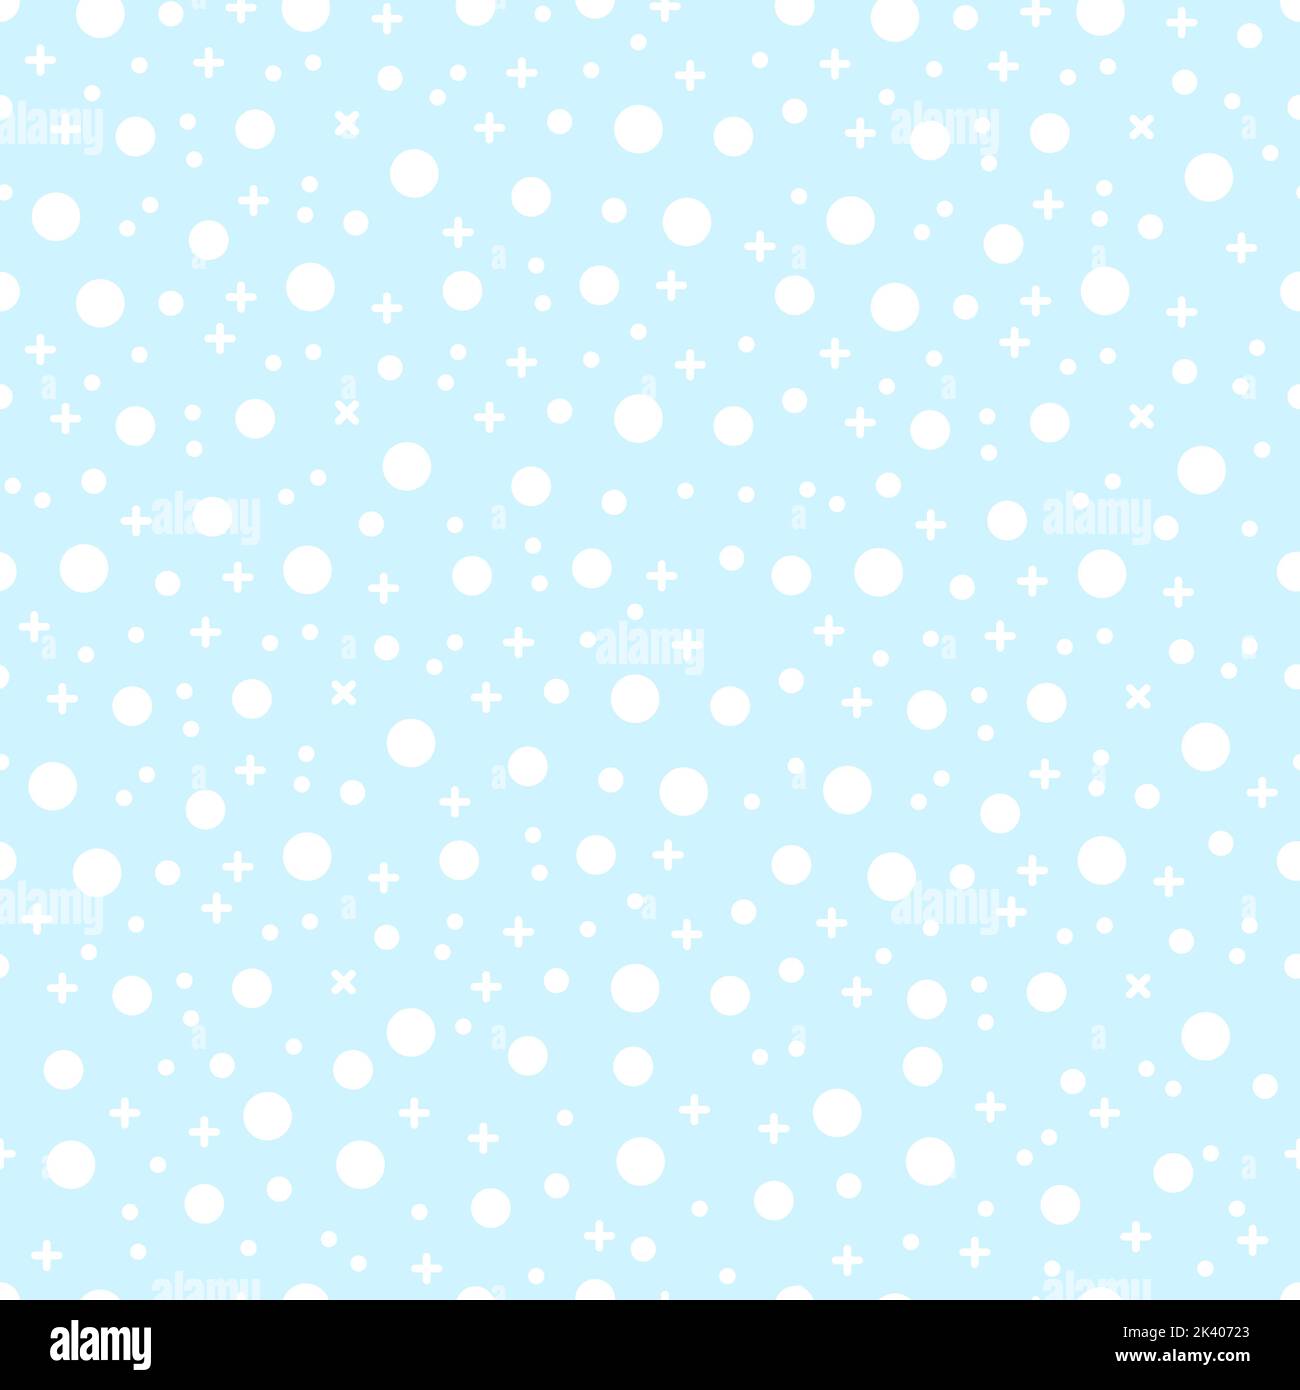 Seamless pattern with Chemical elements on blue background. Stock Vector